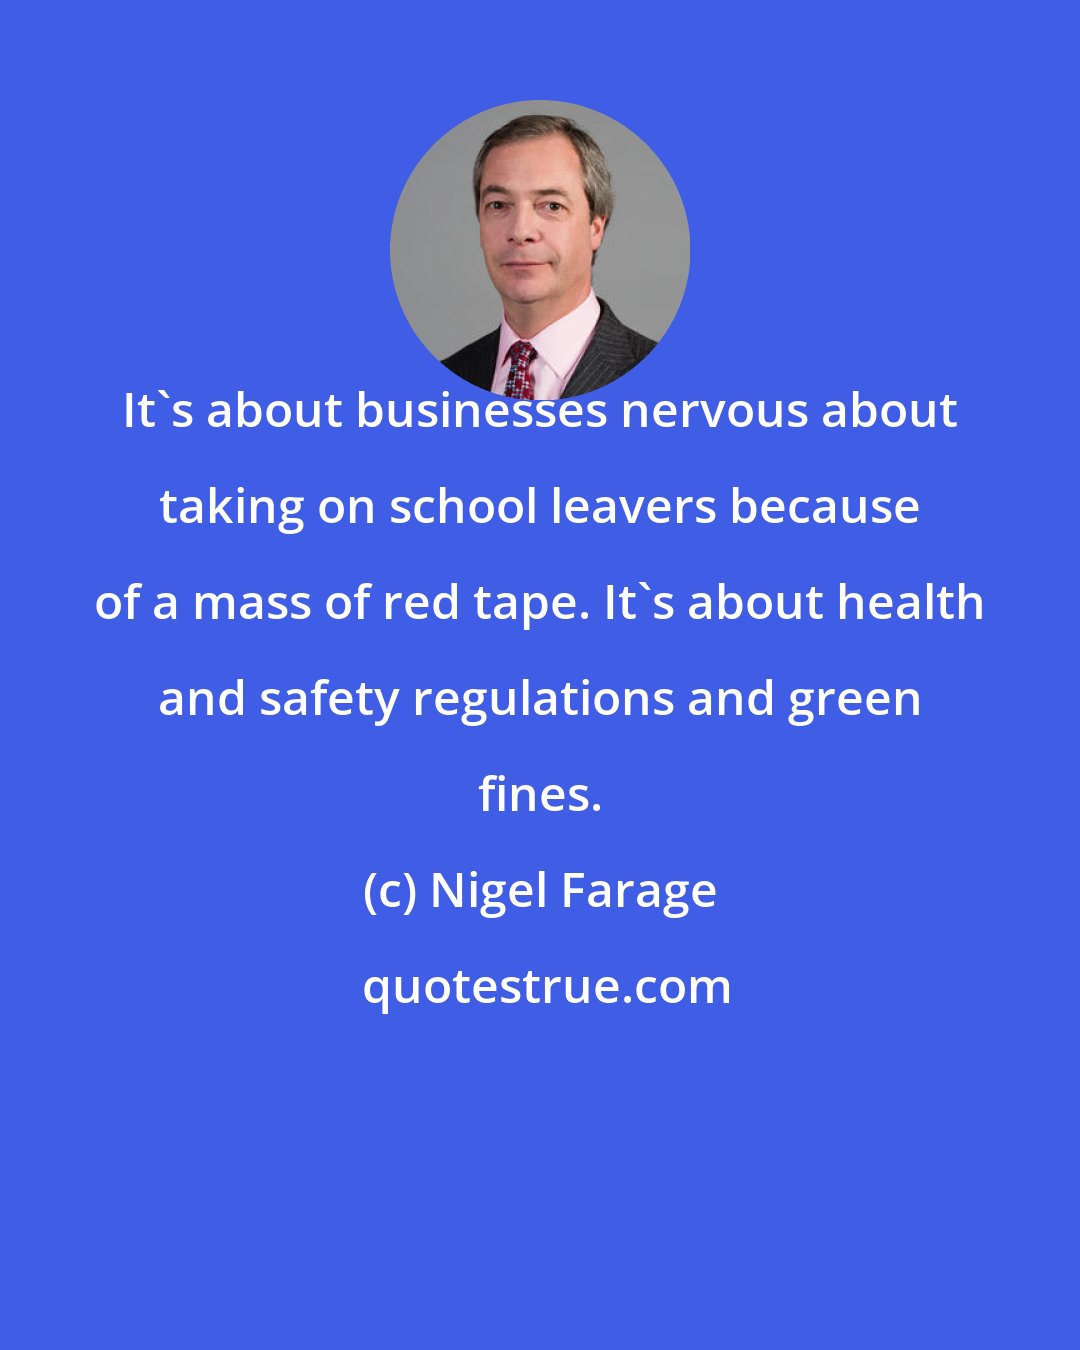 Nigel Farage: It's about businesses nervous about taking on school leavers because of a mass of red tape. It's about health and safety regulations and green fines.